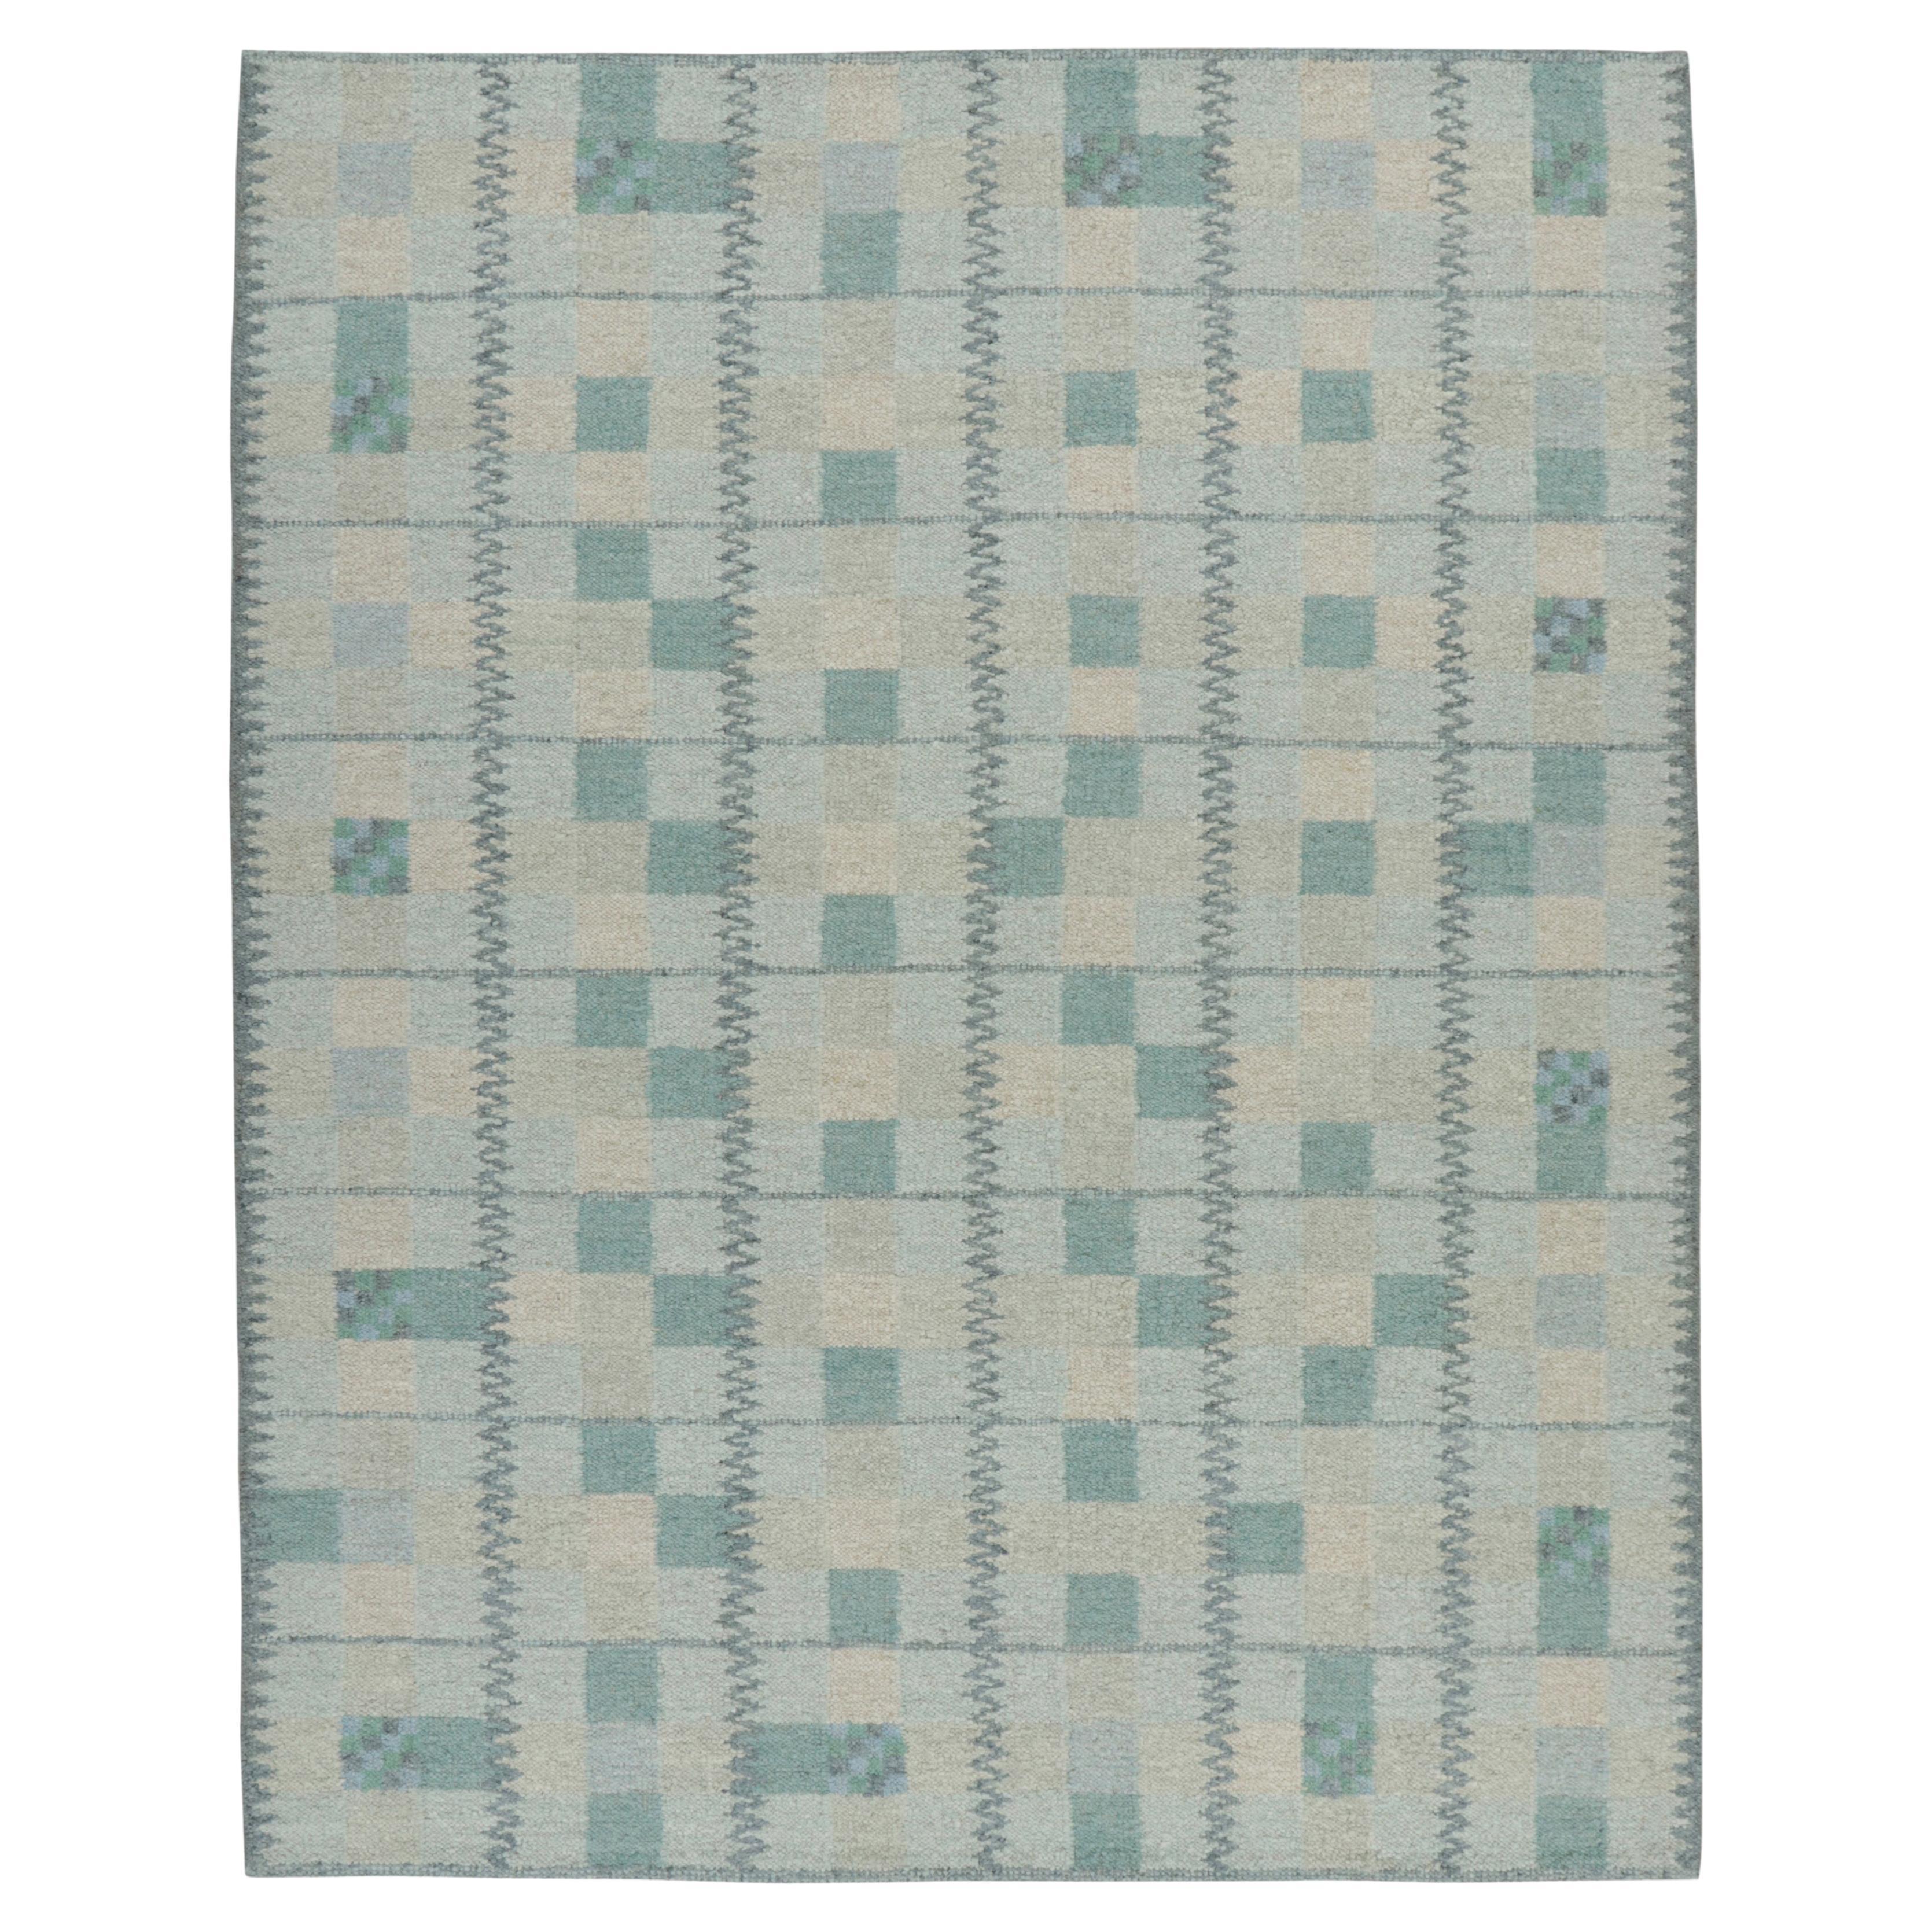 Rug & Kilim’s Scandinavian Style Rug in Teal Blue Tones with Geometric Patterns For Sale